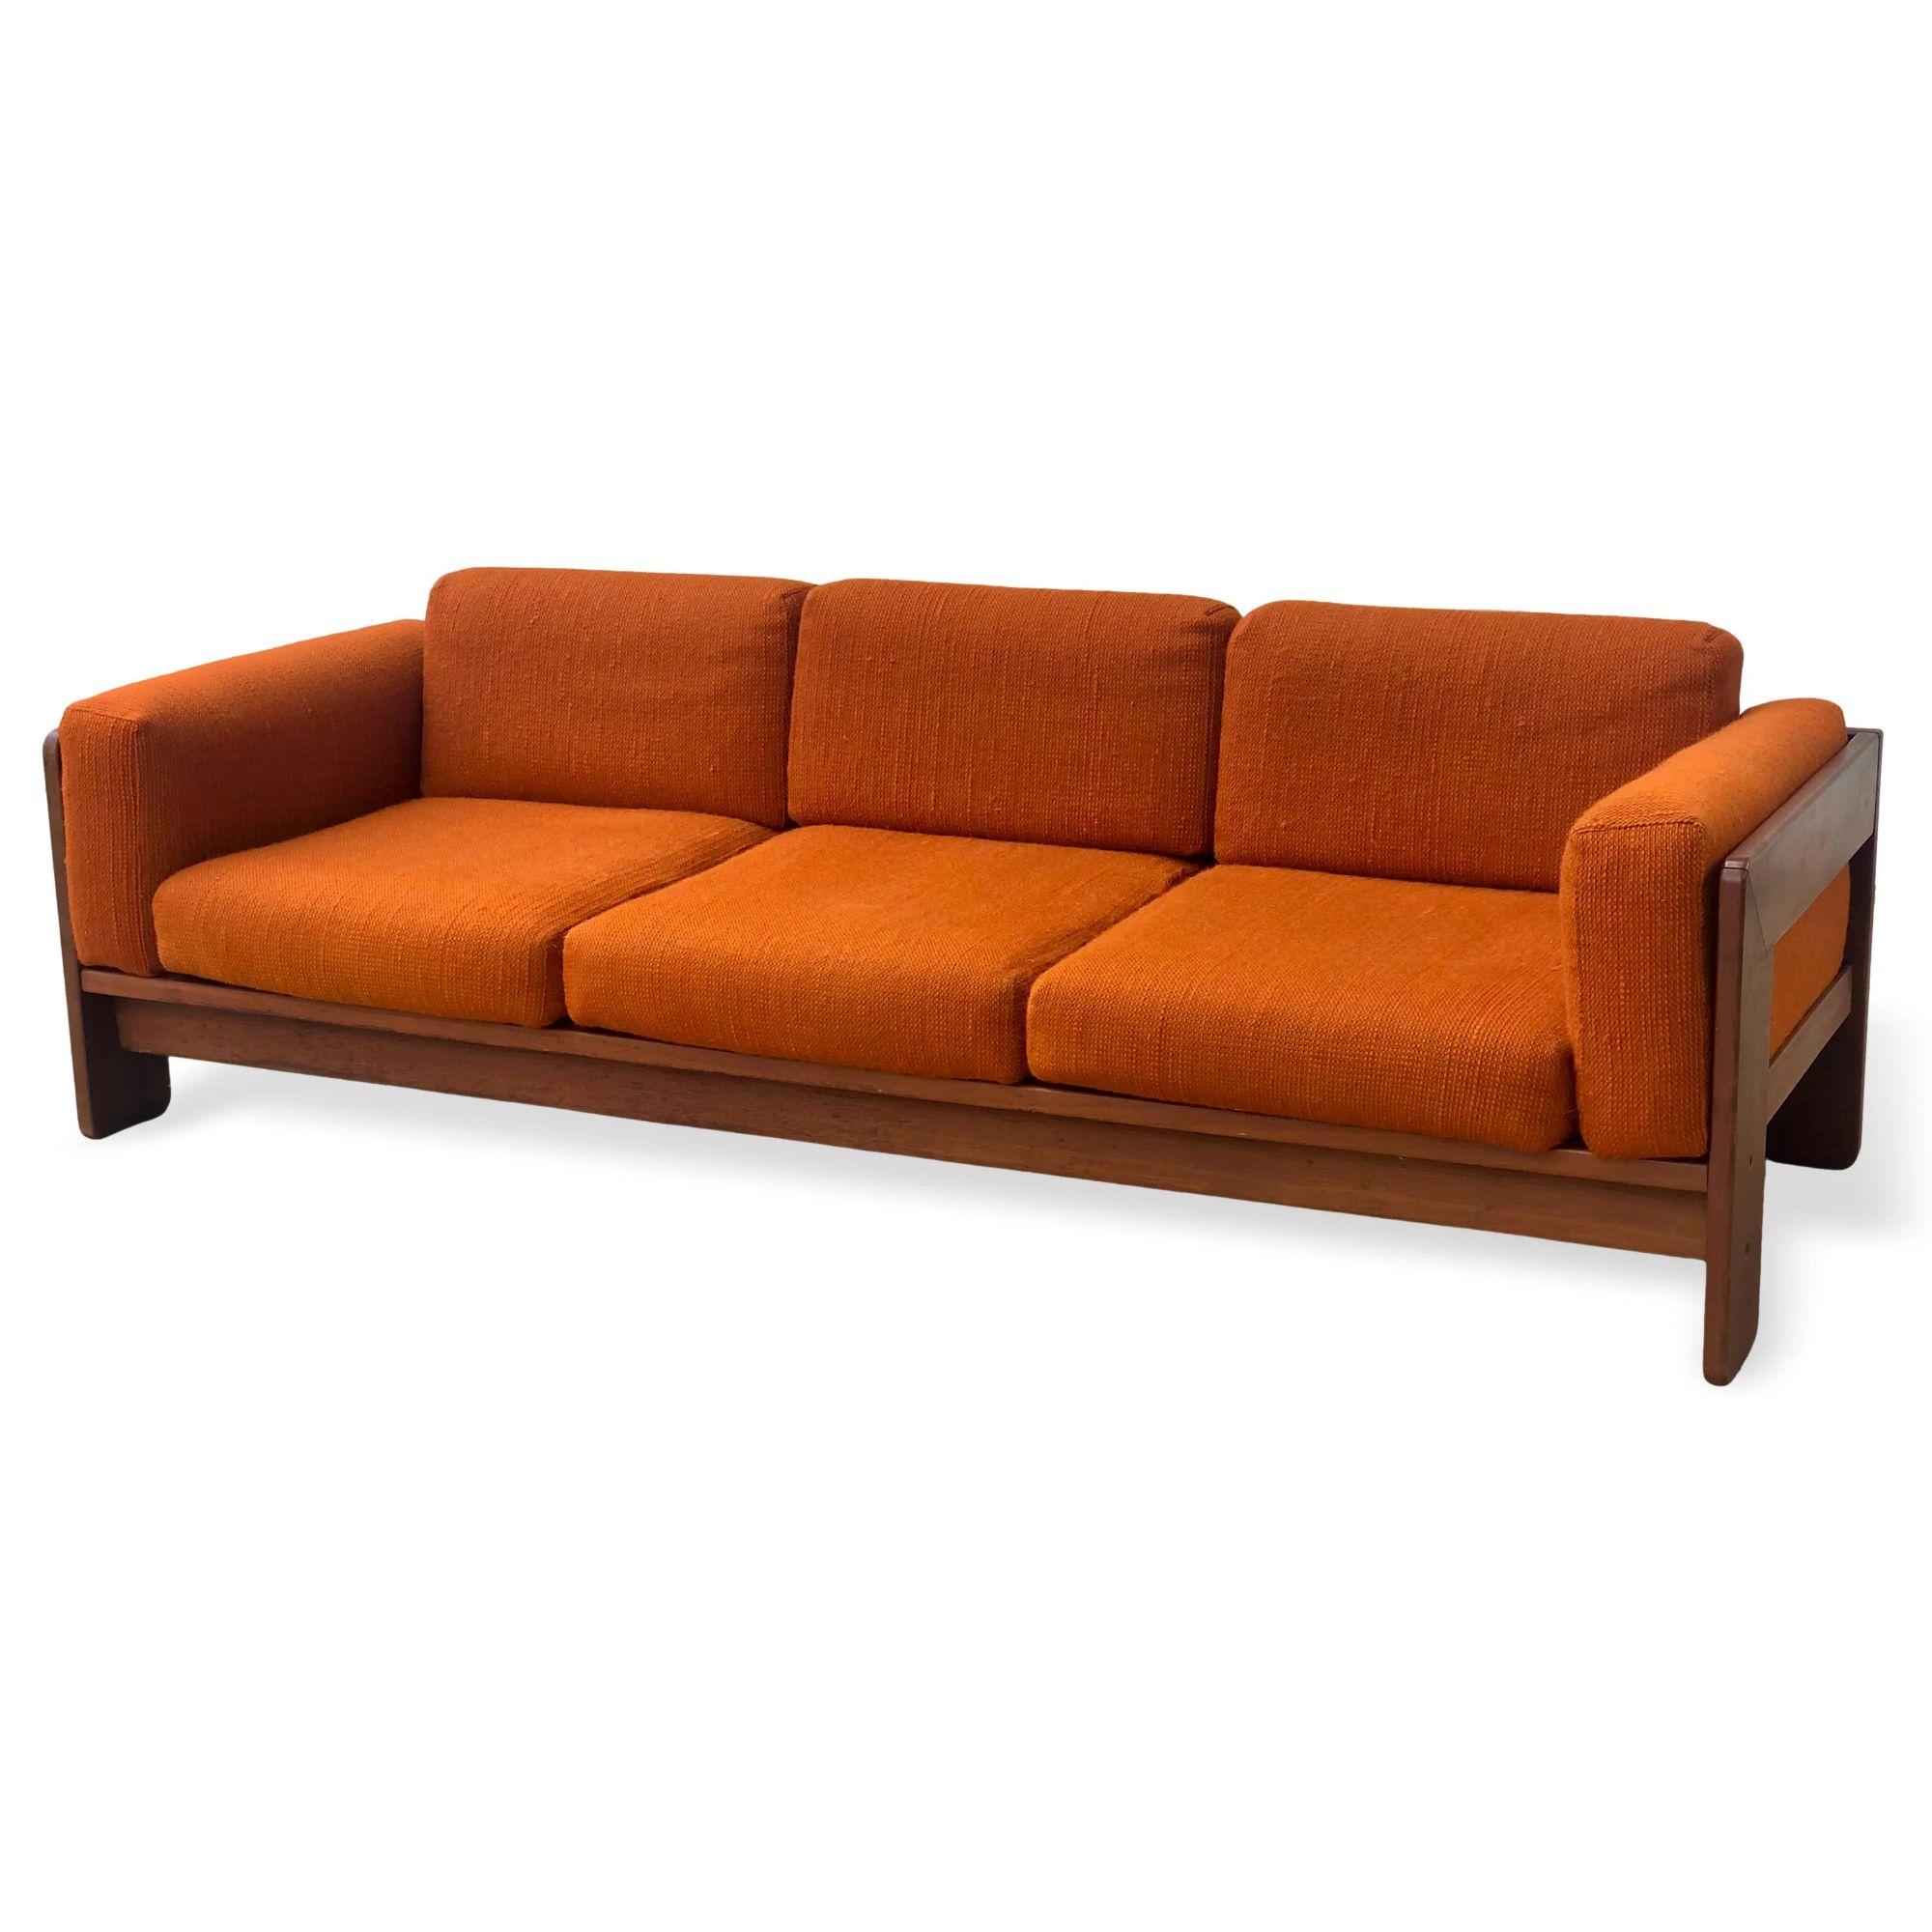 Originally designed in 1962, this incredible vintage Mid-Century Modern three-seat sofa couch by Tobia Scarpa for Knoll is circa 1970. The sofa has three seat cushions, three backrest cushions and two arm cushions and is upholstered in original